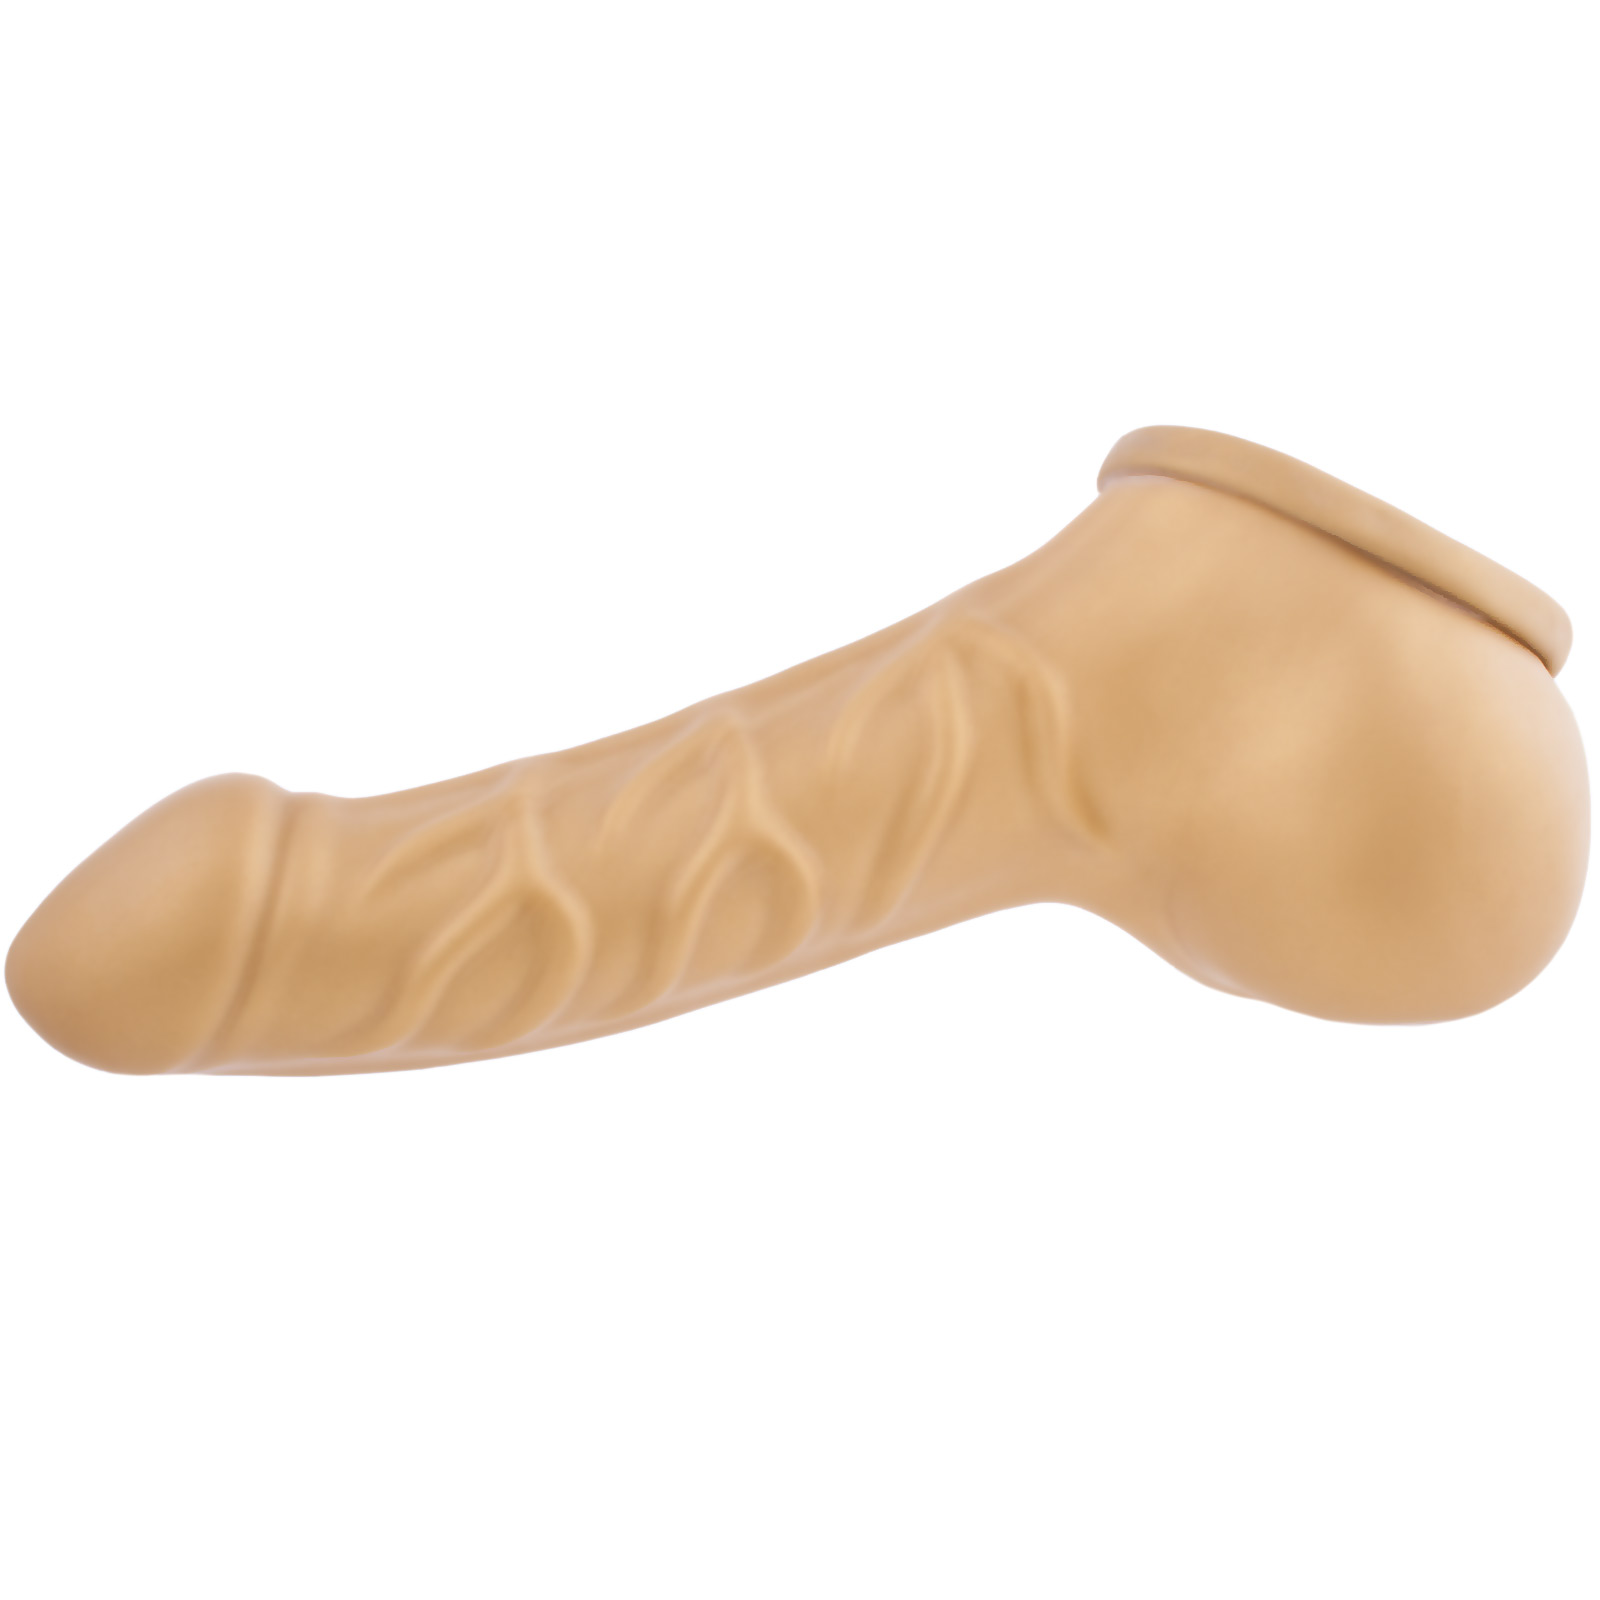 Toylie Latex Penis Sleeve «FRANZ» golden, with strong veins and molded scrotum